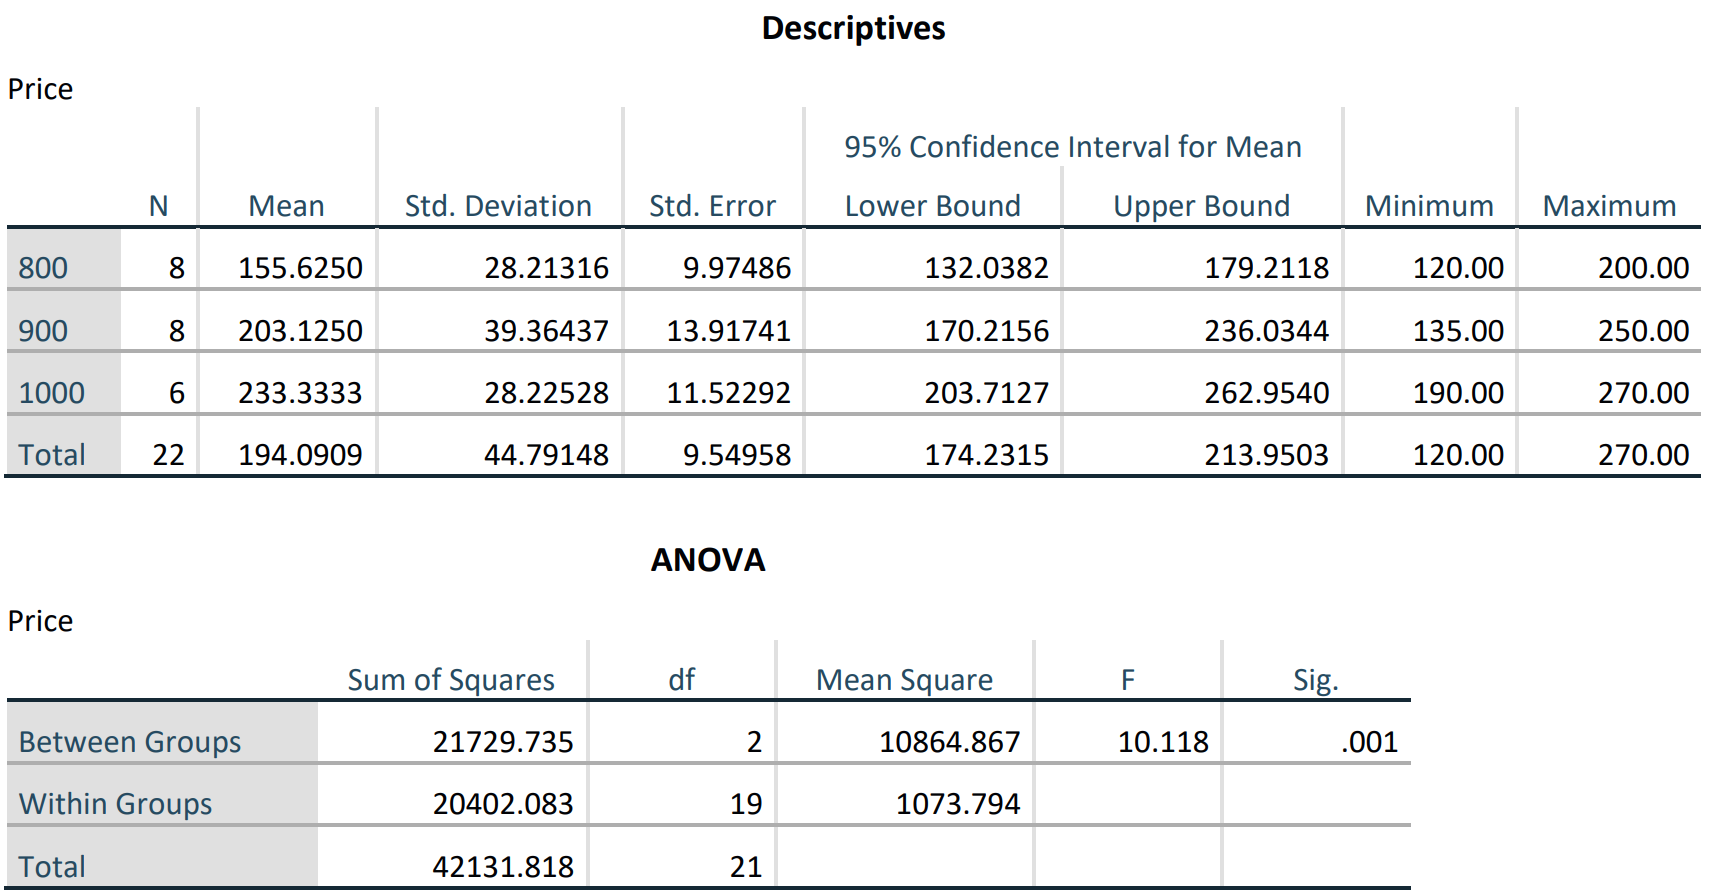 Tables of Descriptives and ANOVA for the Example 11-4 data, generated in SPSS